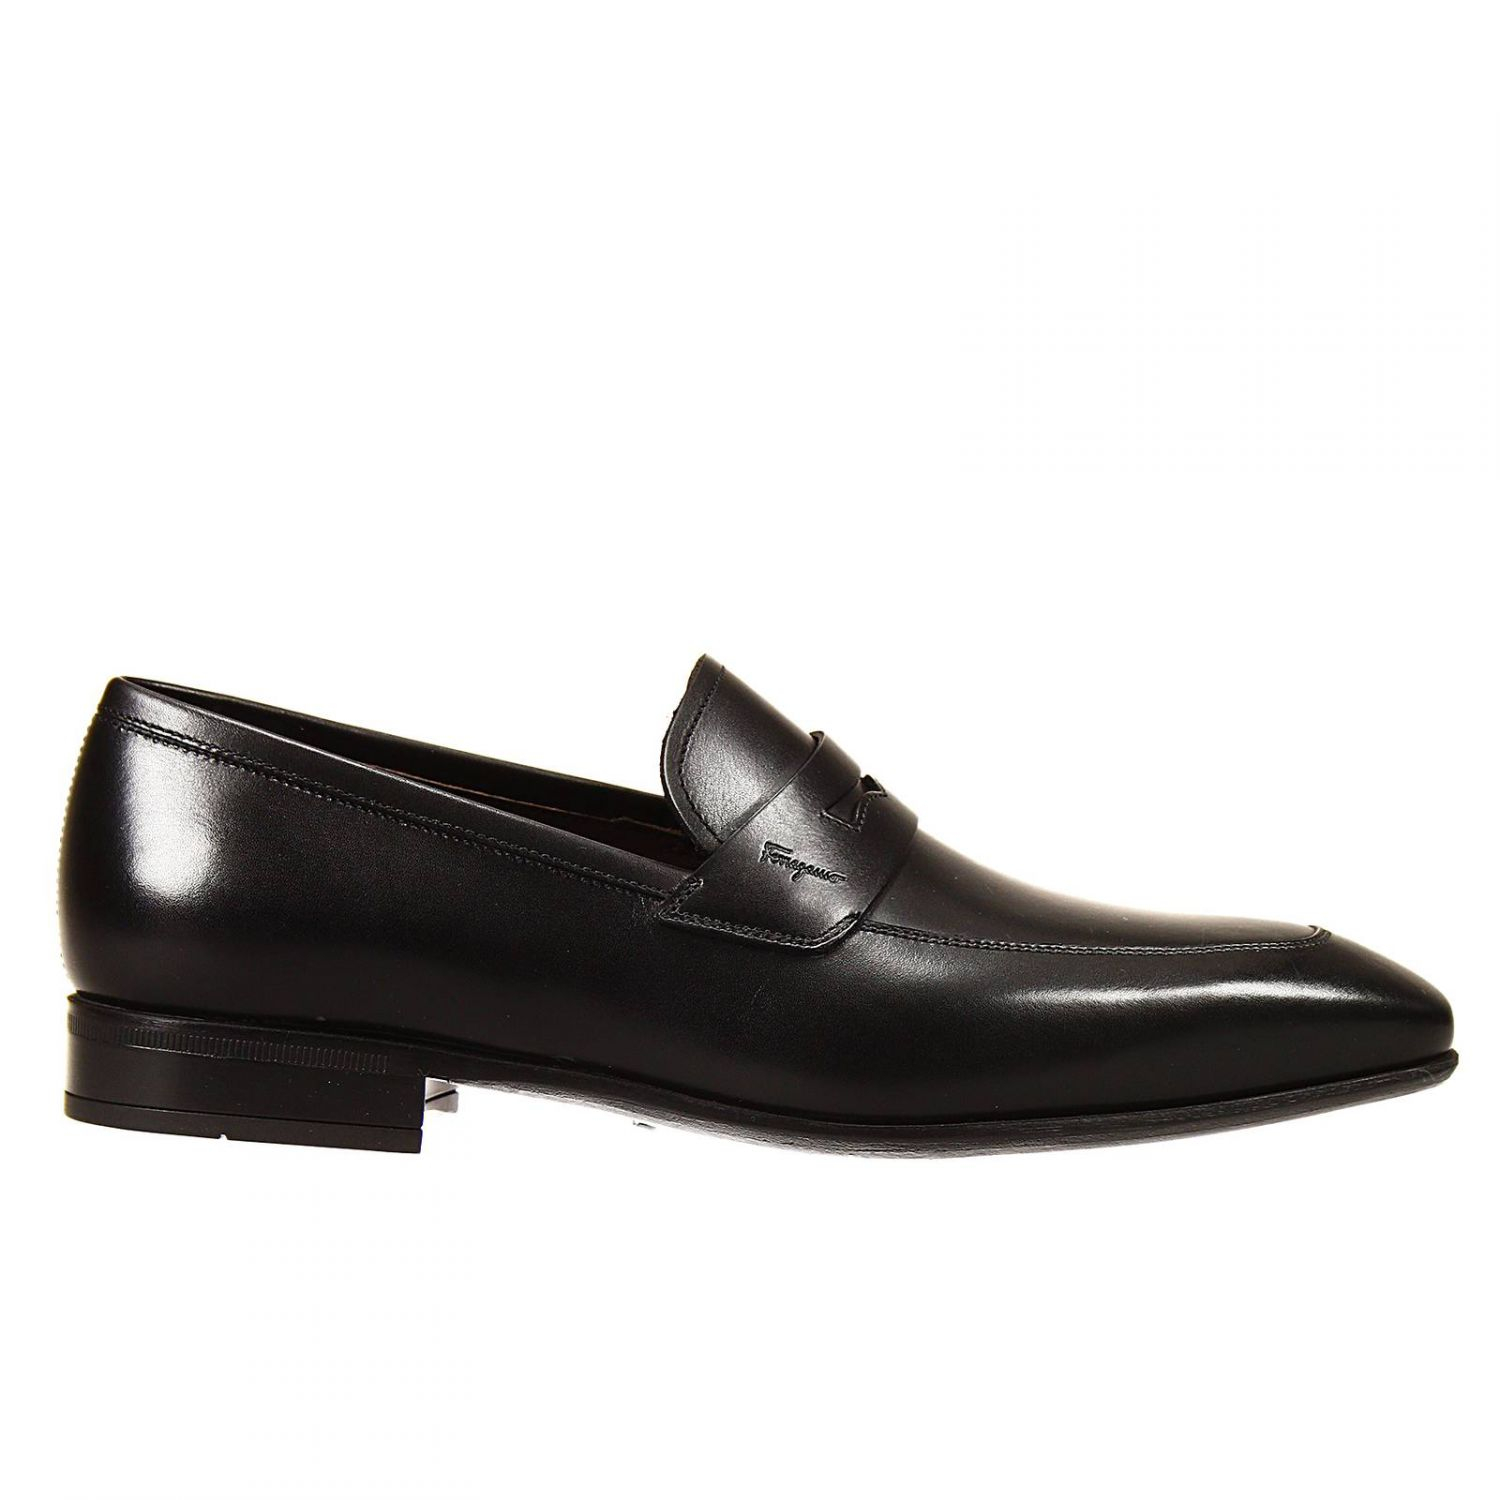 Lyst - Ferragamo Shoes Nomad Penny Loafer Leather Bottom Rubber Sole in ...